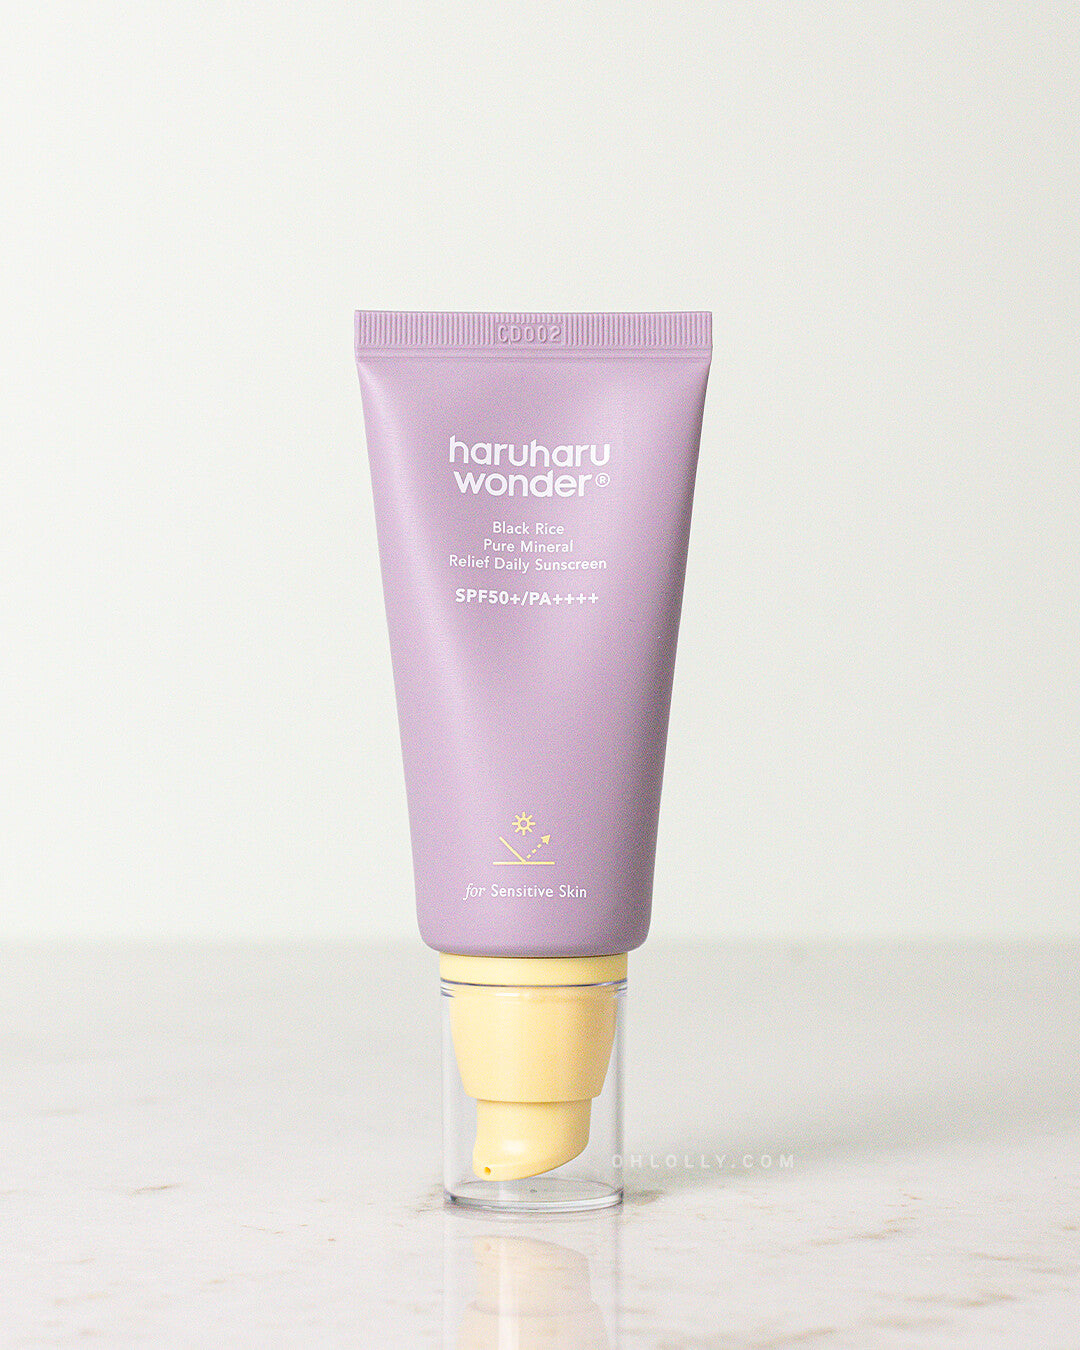 Ohlolly Korean Skincare Haruharu Wonder Black Rice Pure Mineral Relief Daily Sunscreen